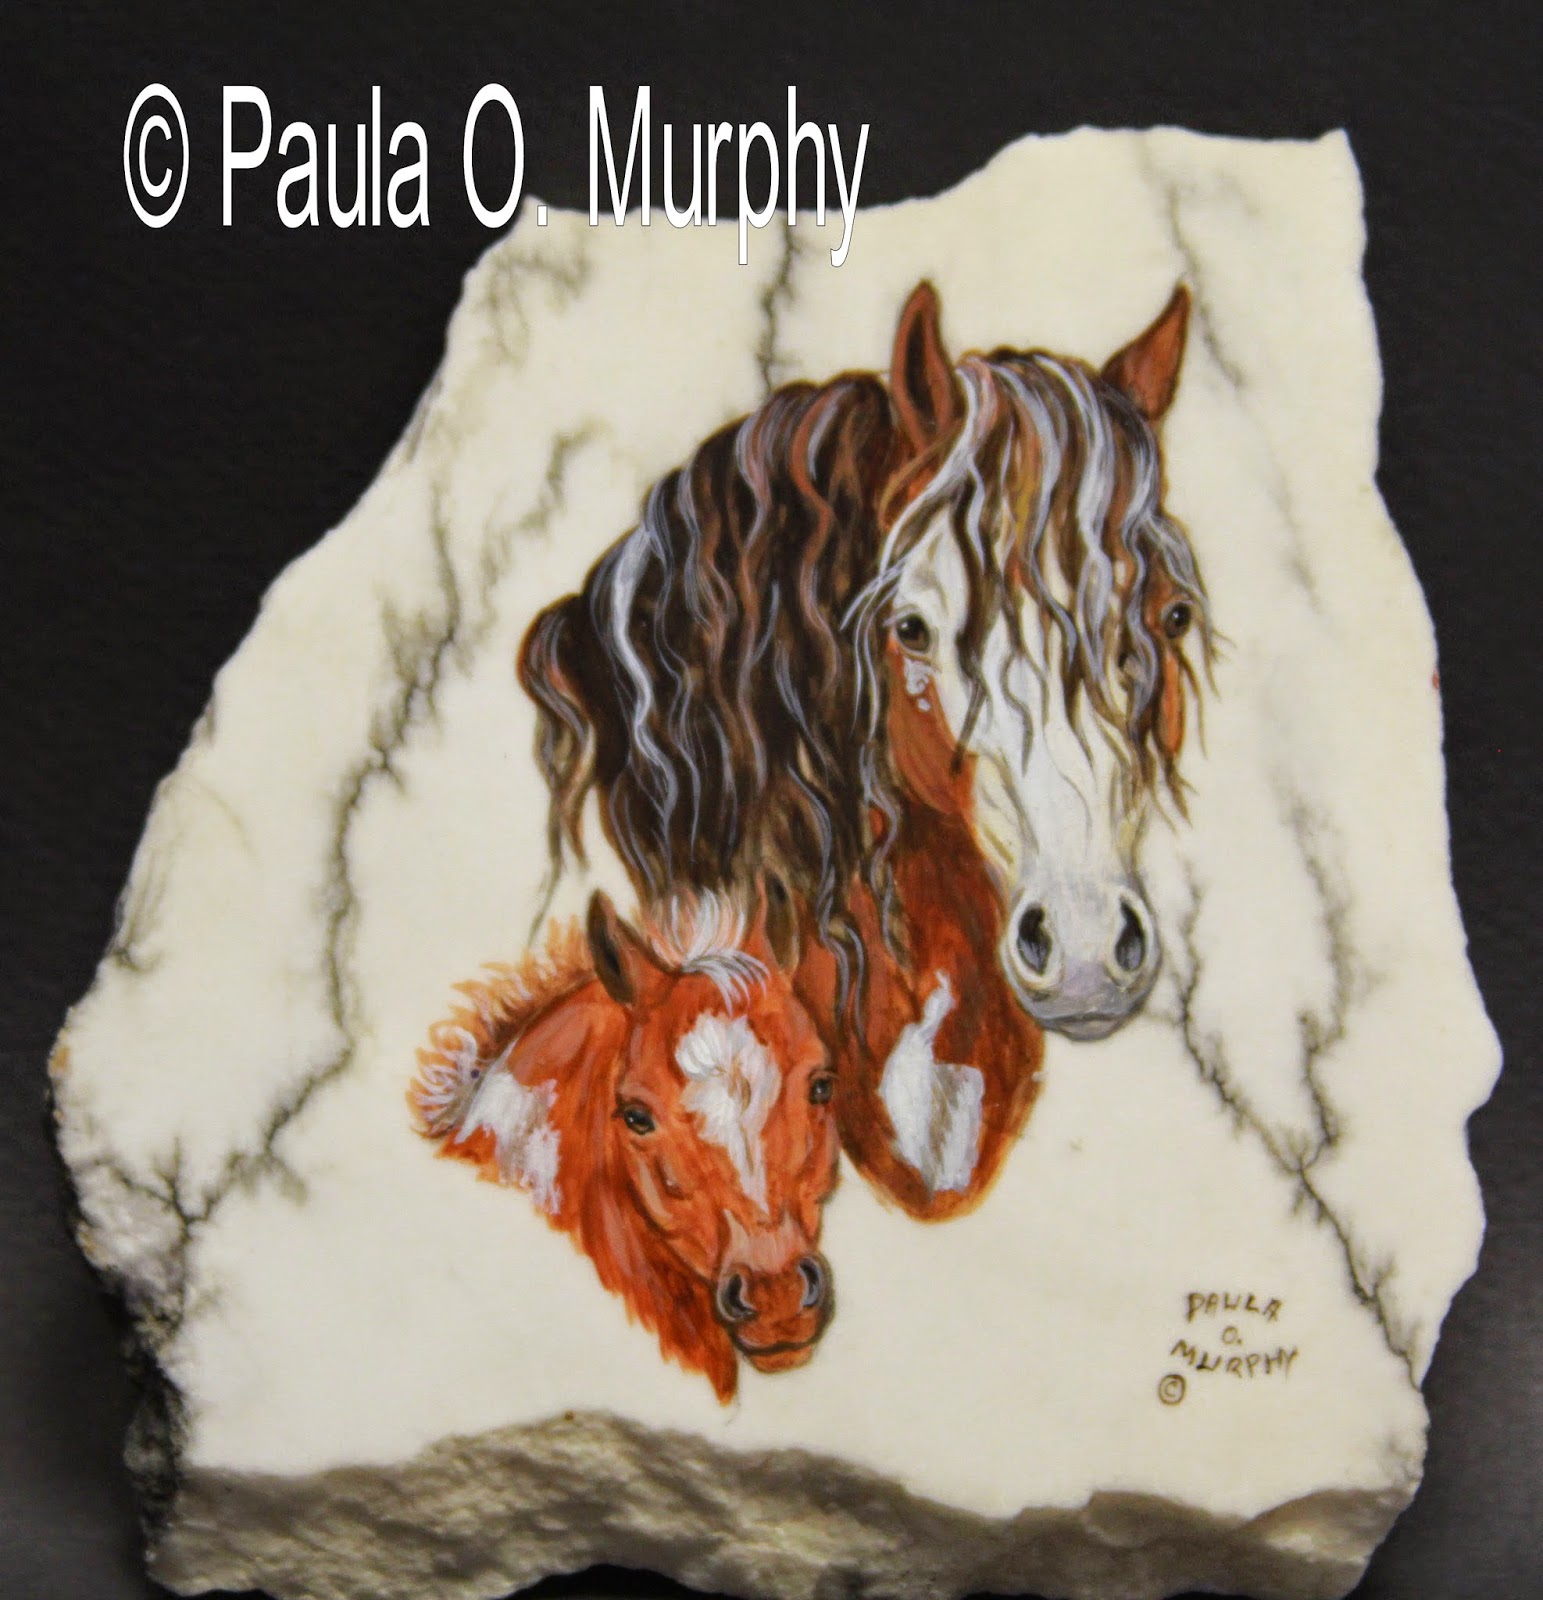 Hand painted gemstone on halite of horse mare and colt